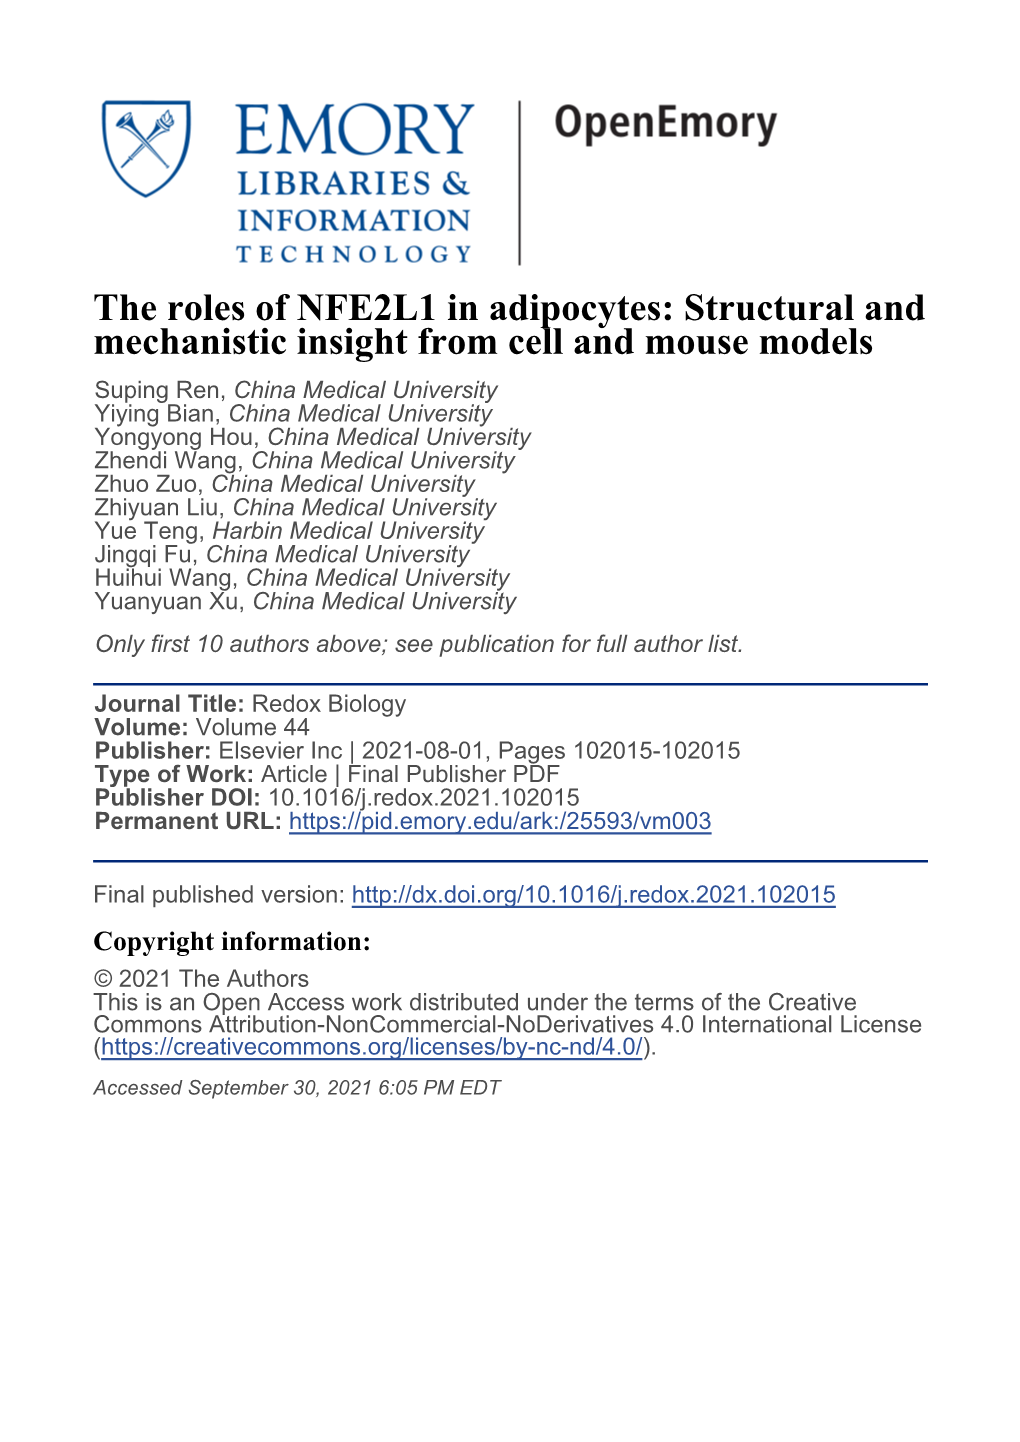 The Roles of NFE2L1 in Adipocytes